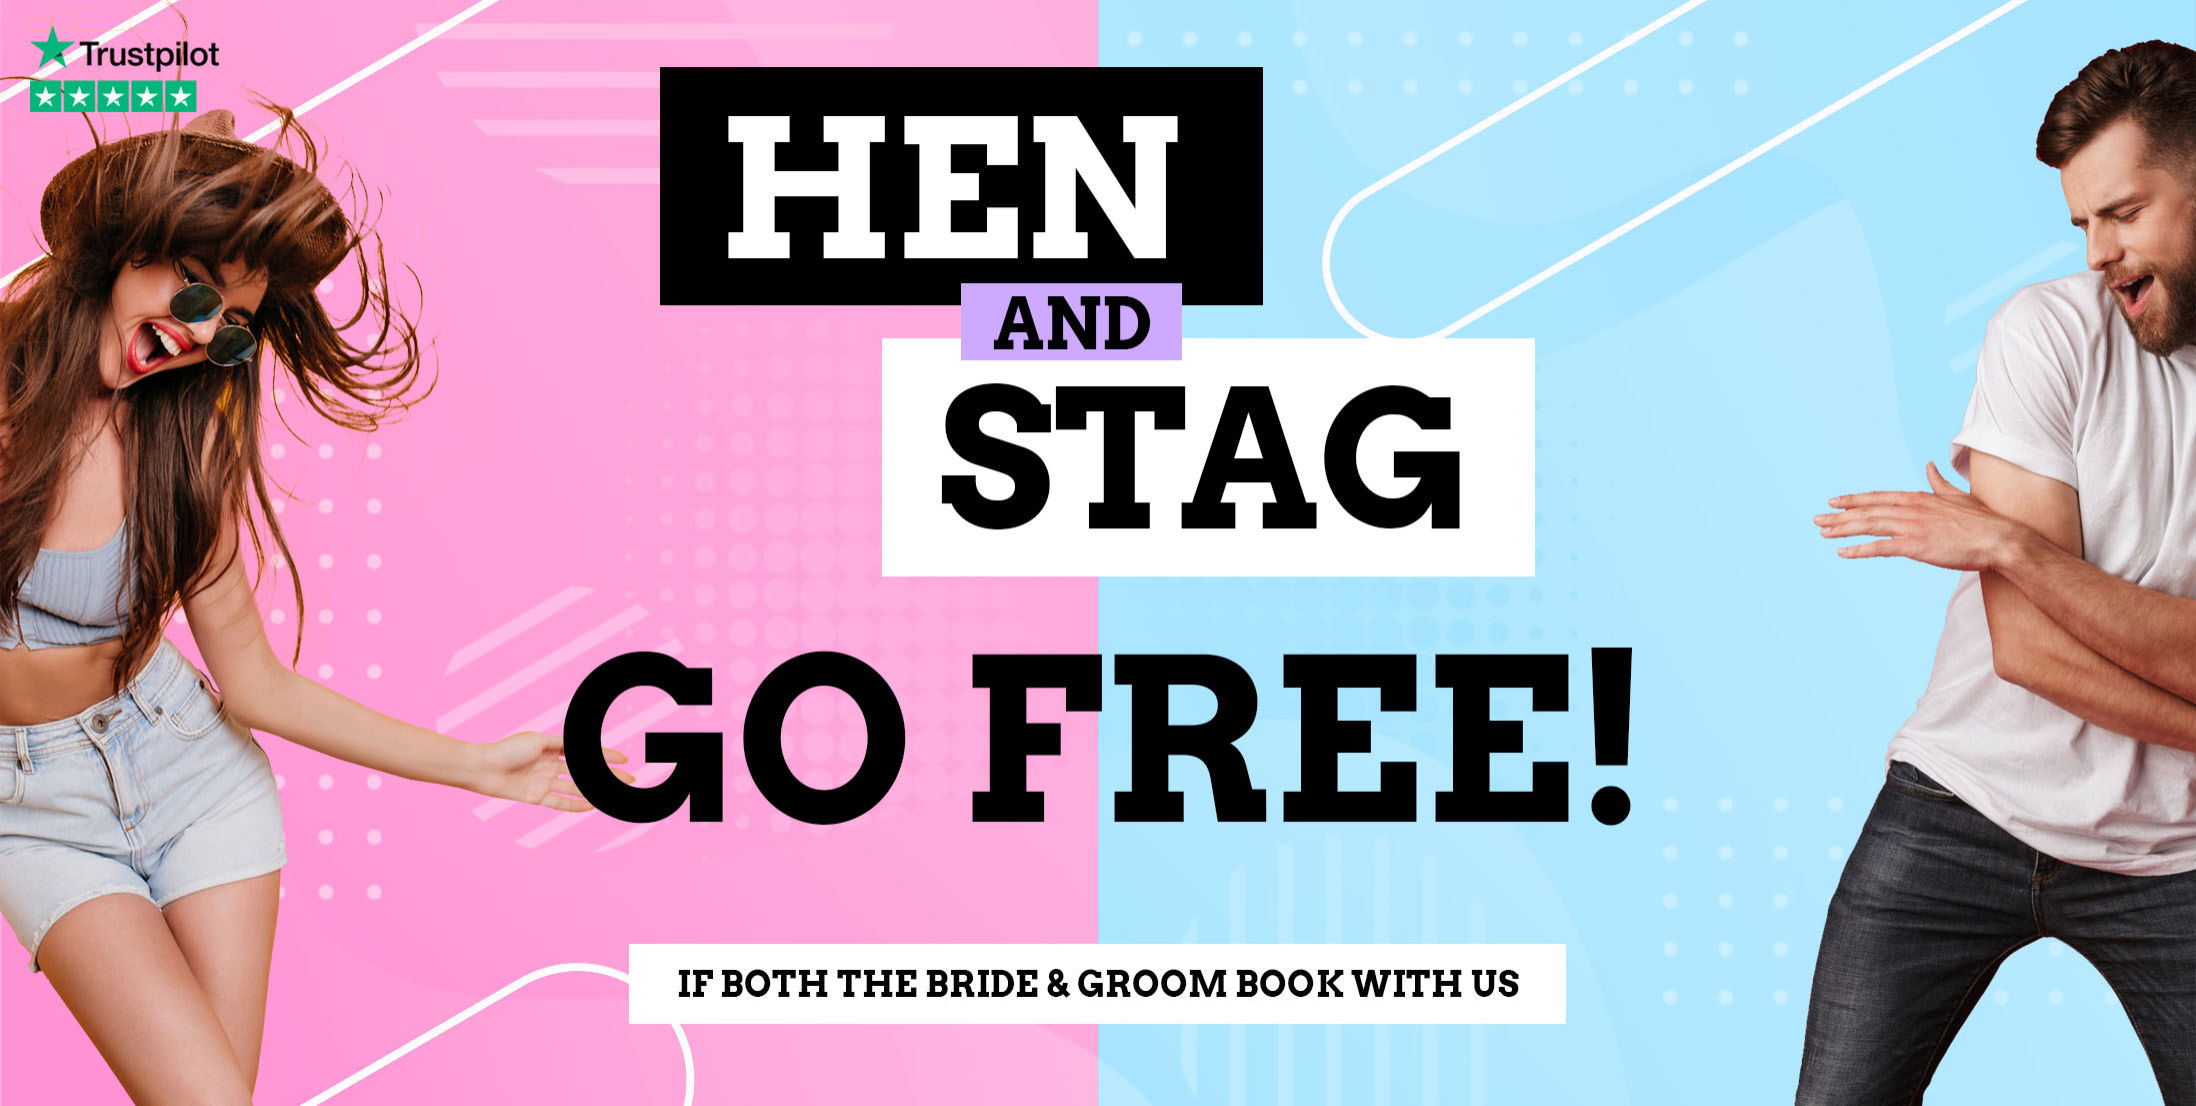 Hen & Stag GO FREE!